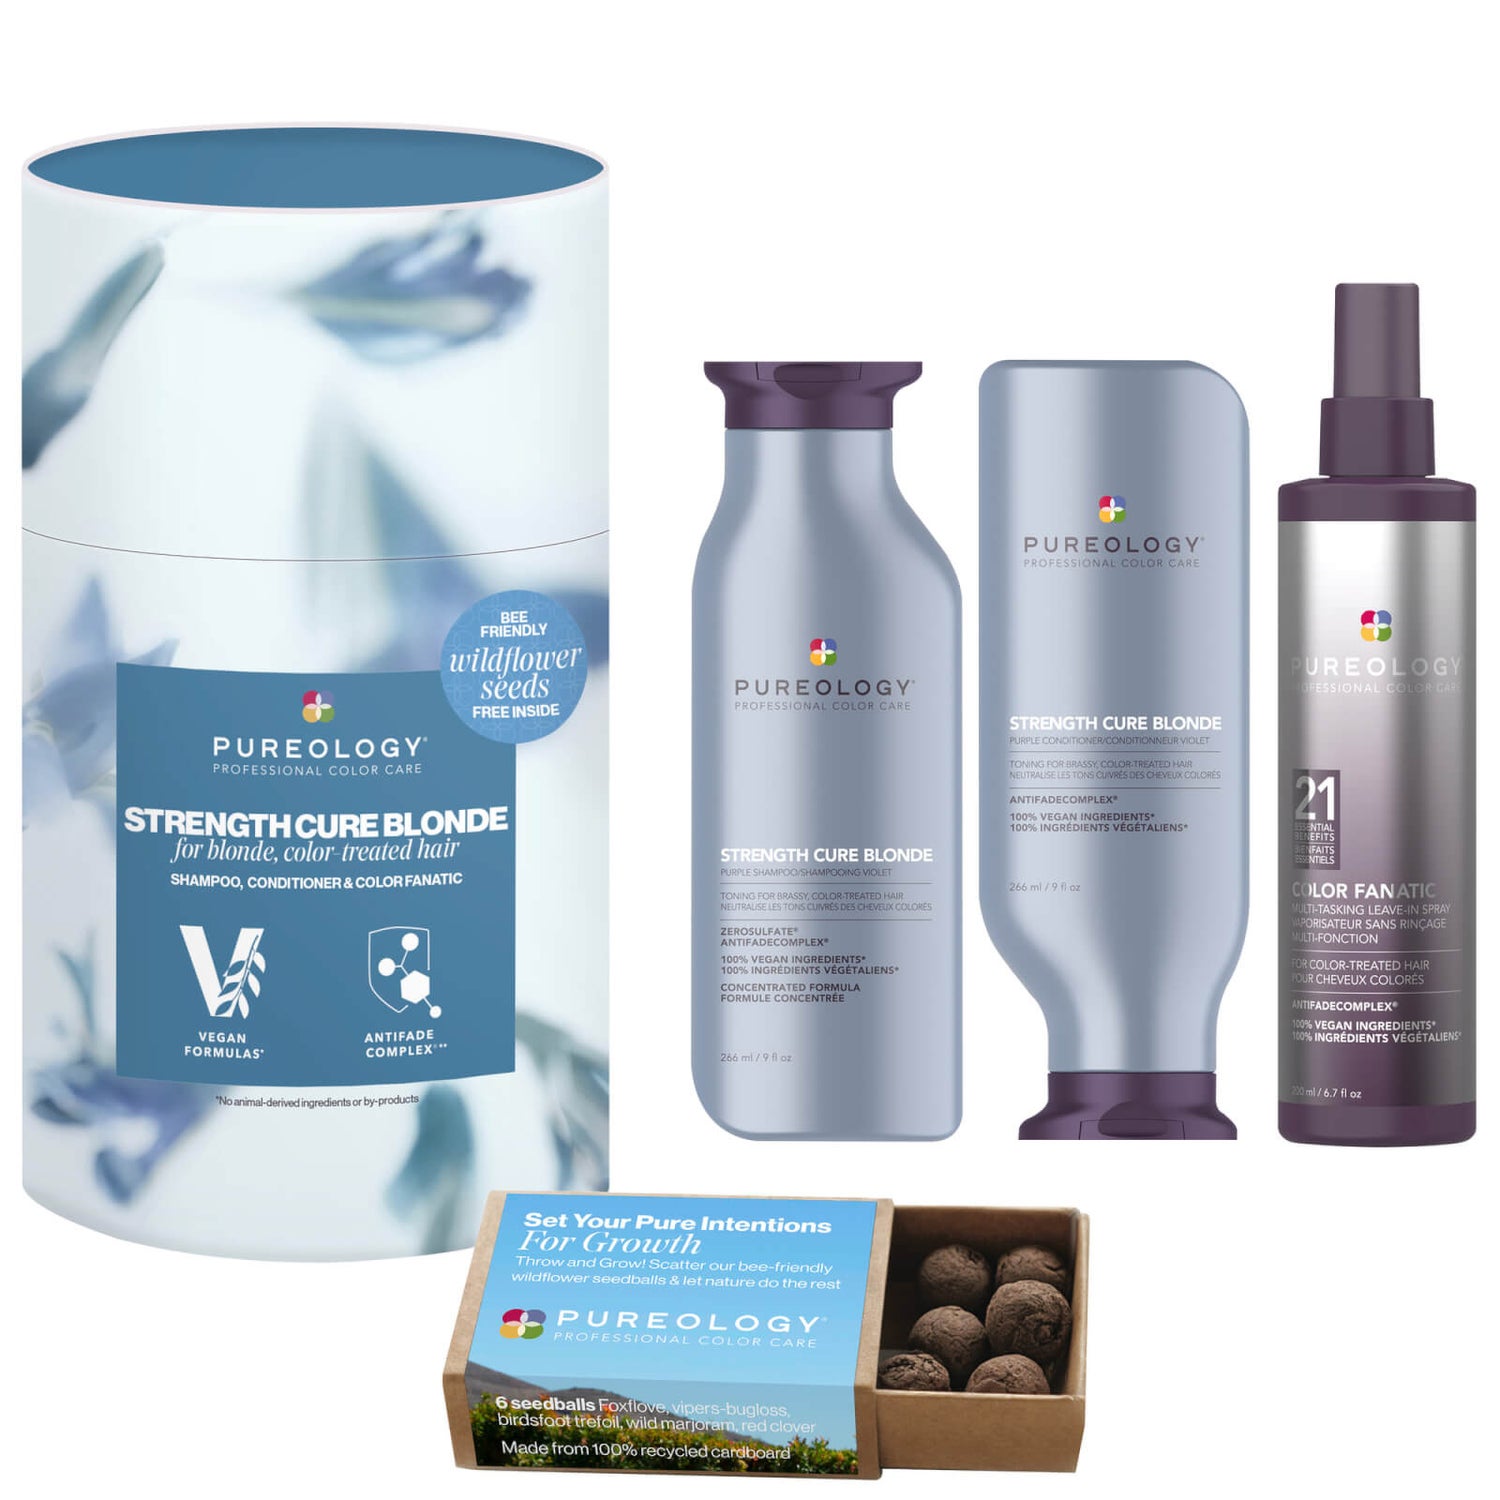 Pureology Strength Cure Blonde Gift Set